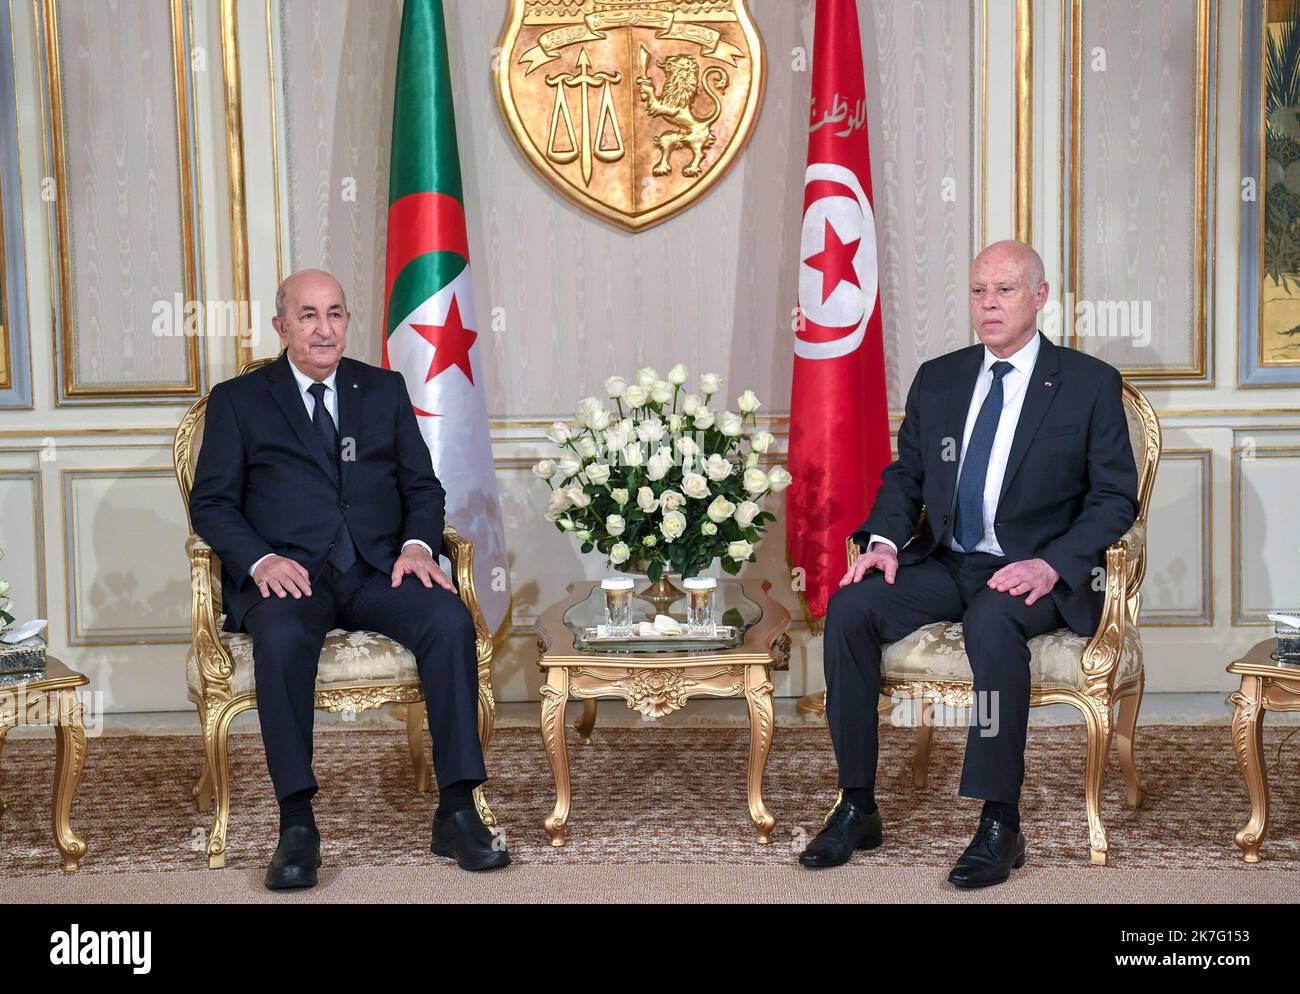 ©Yassine Mahjoub/MAXPPP - Algerian President Abdelmadjid Tebboune begins a two-day state visit to Tunisia on Wednesday December 15 and 16 at the invitation of his Tunisian counterpart, KavØs SavØed, who received him at Tunis-Carthage airport and the palace of Carthage. The official visit of the Algerian President aims to "strengthen the bonds of brotherhood and the relations of cooperation and partnership as well as to consolidate consultation and coordination between the leaders of the two countries on topical regional and international issues. Tunisian presidency.  Stock Photo